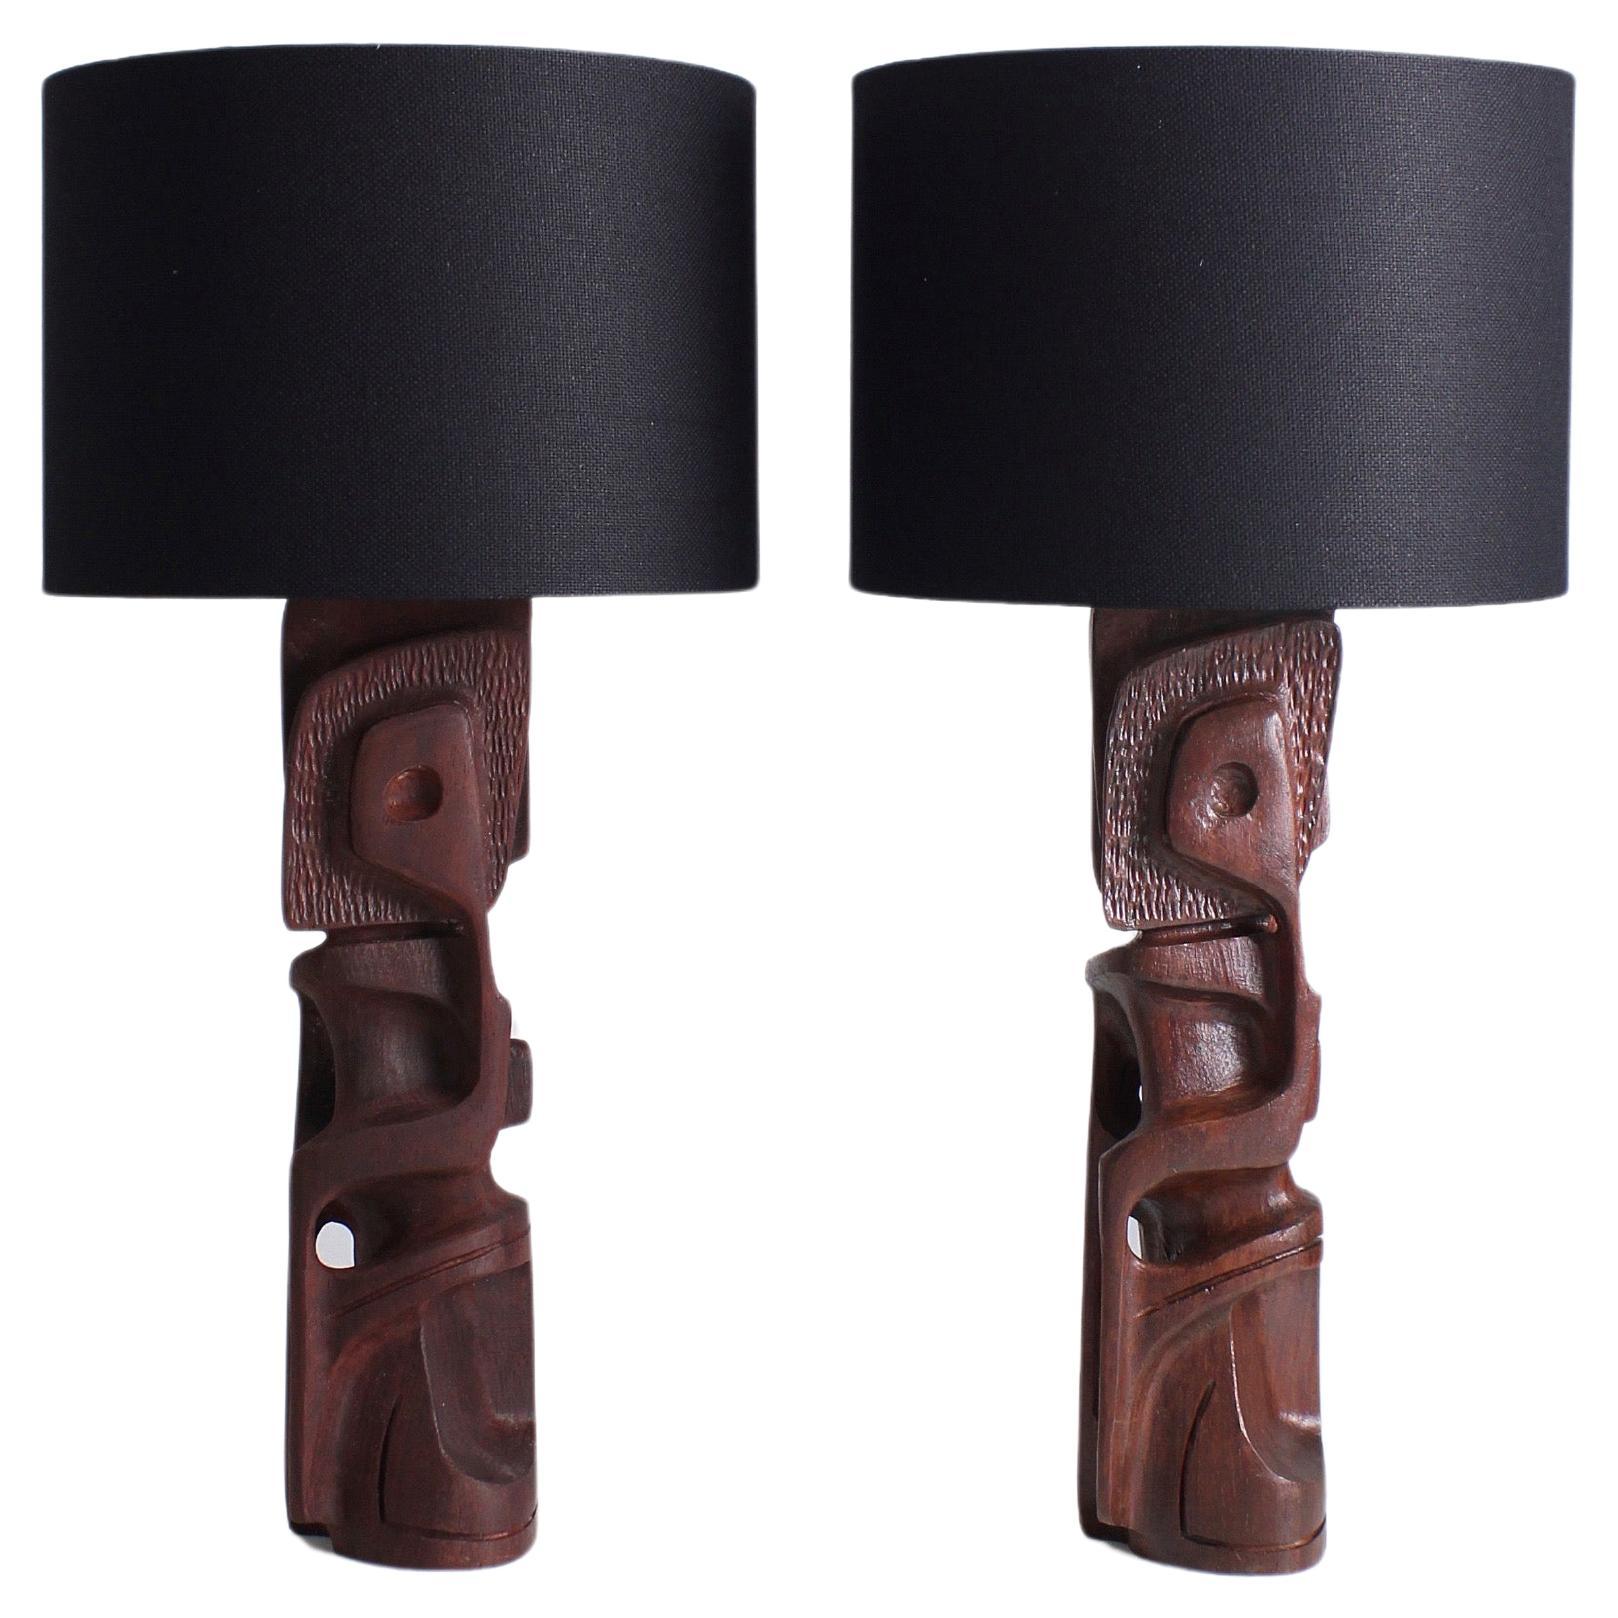 Pair of sculptural table lamps in Padouk wood by Gianni Pinna, 1970s For Sale